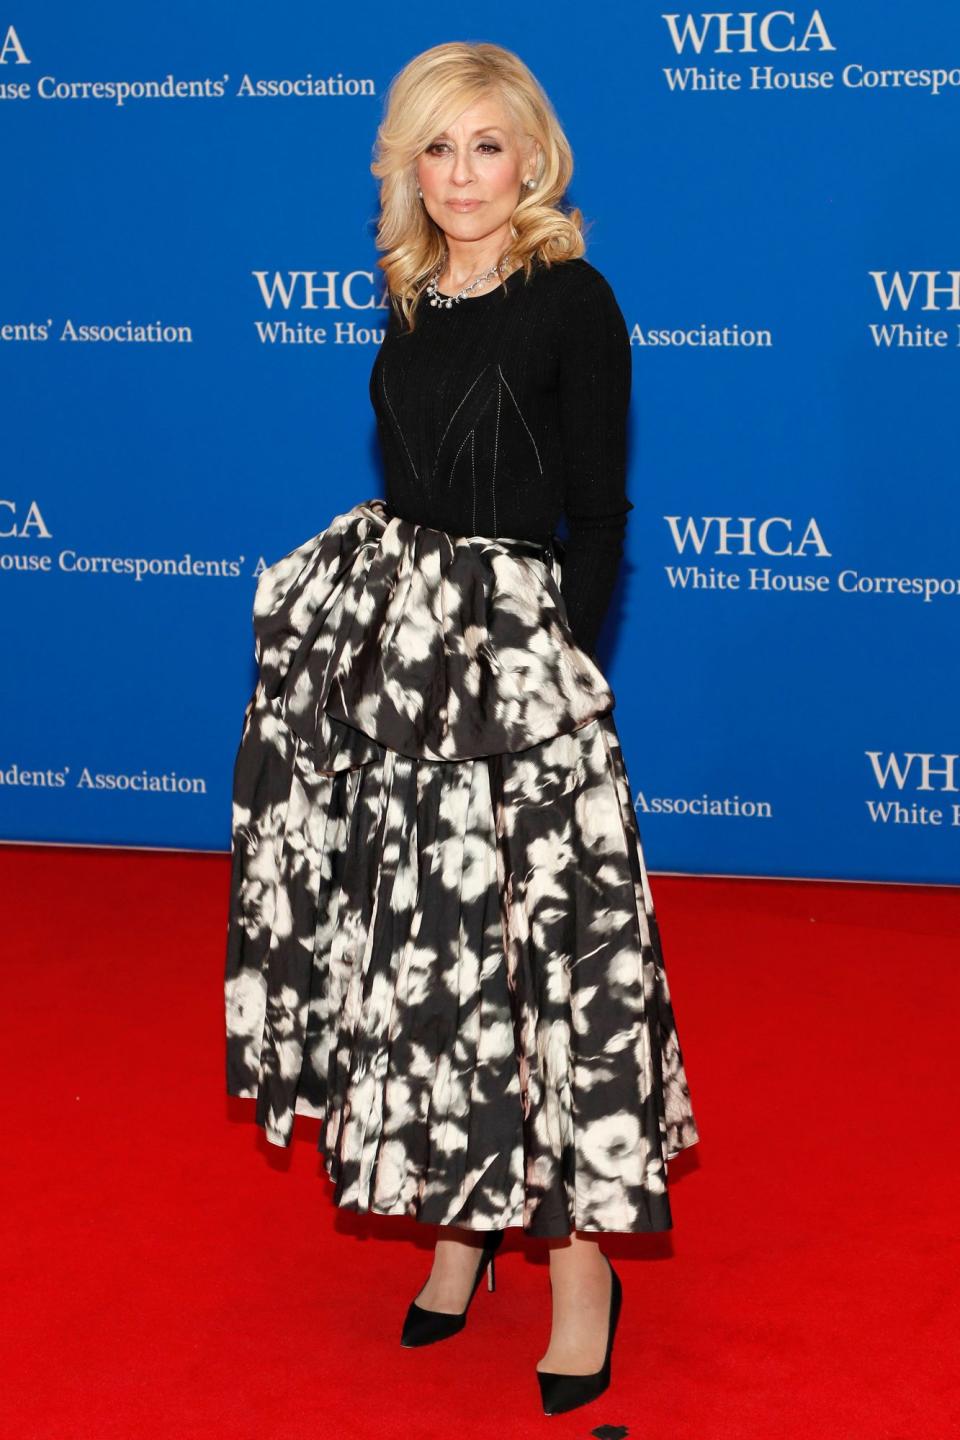 <p>wears an elegant Jason Wu design featuring a floral skirt, plus black pumps and statement jewelry. </p>